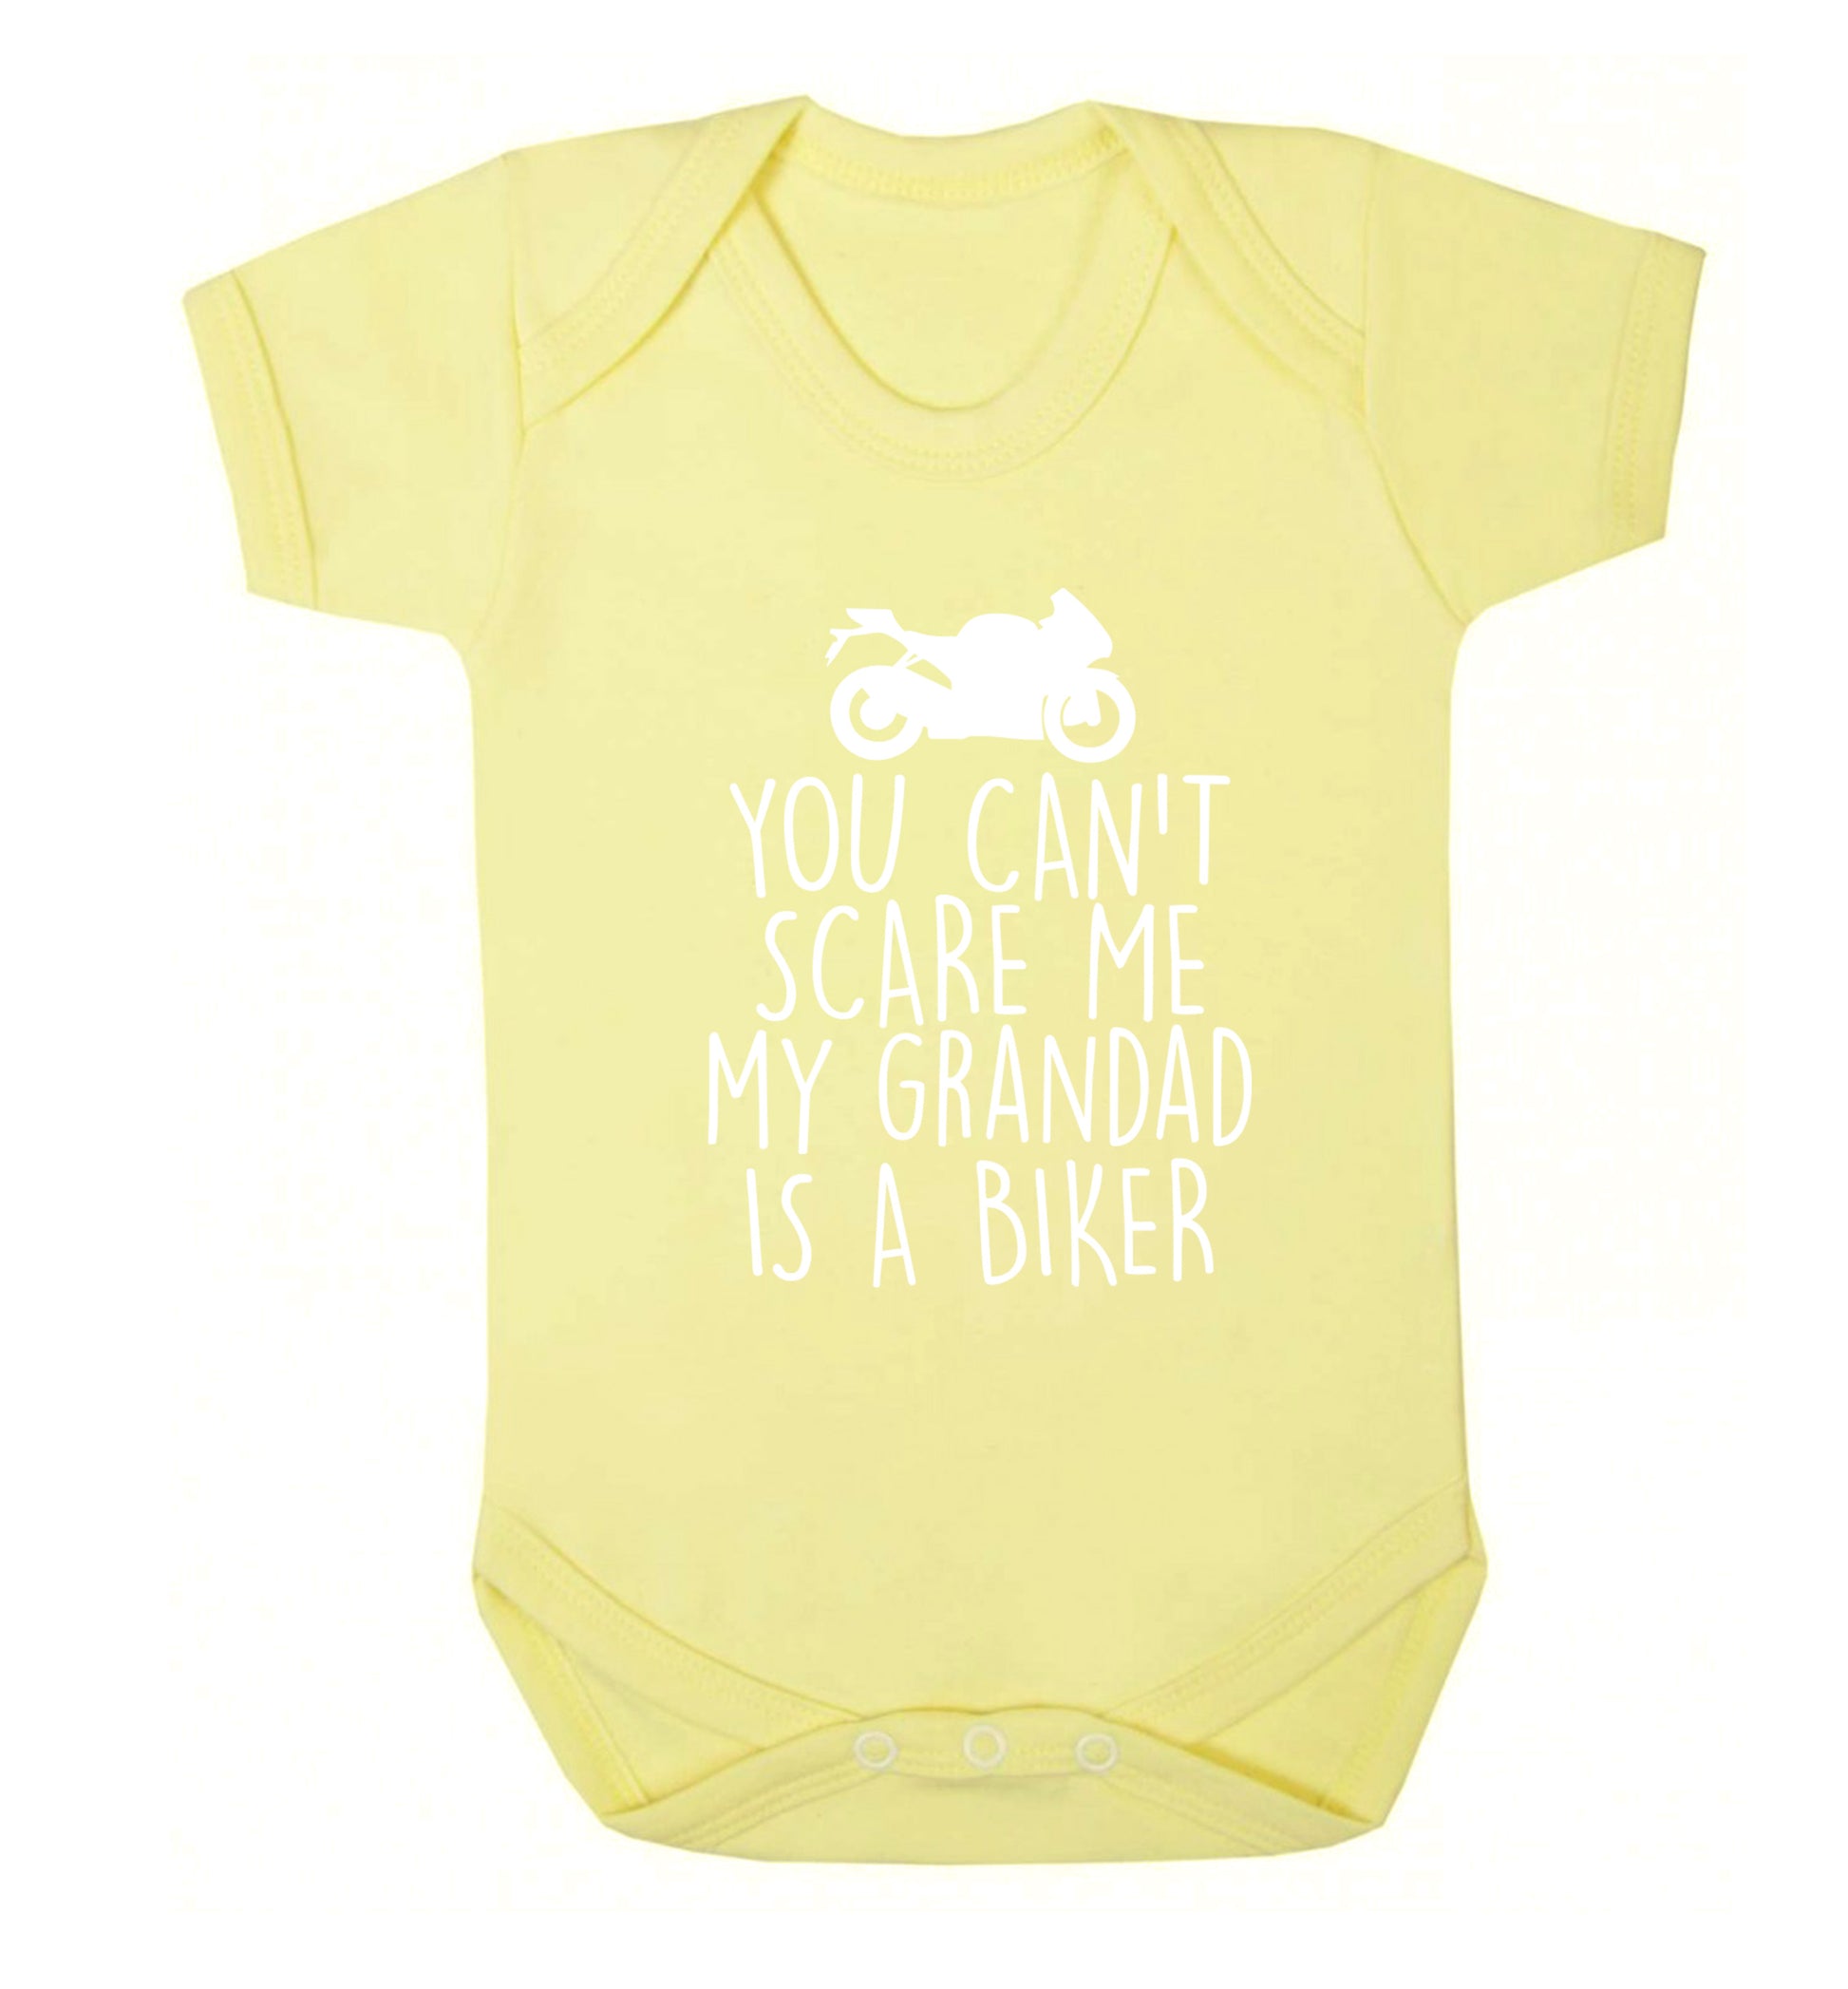 You can't scare me my grandad is a biker Baby Vest pale yellow 18-24 months